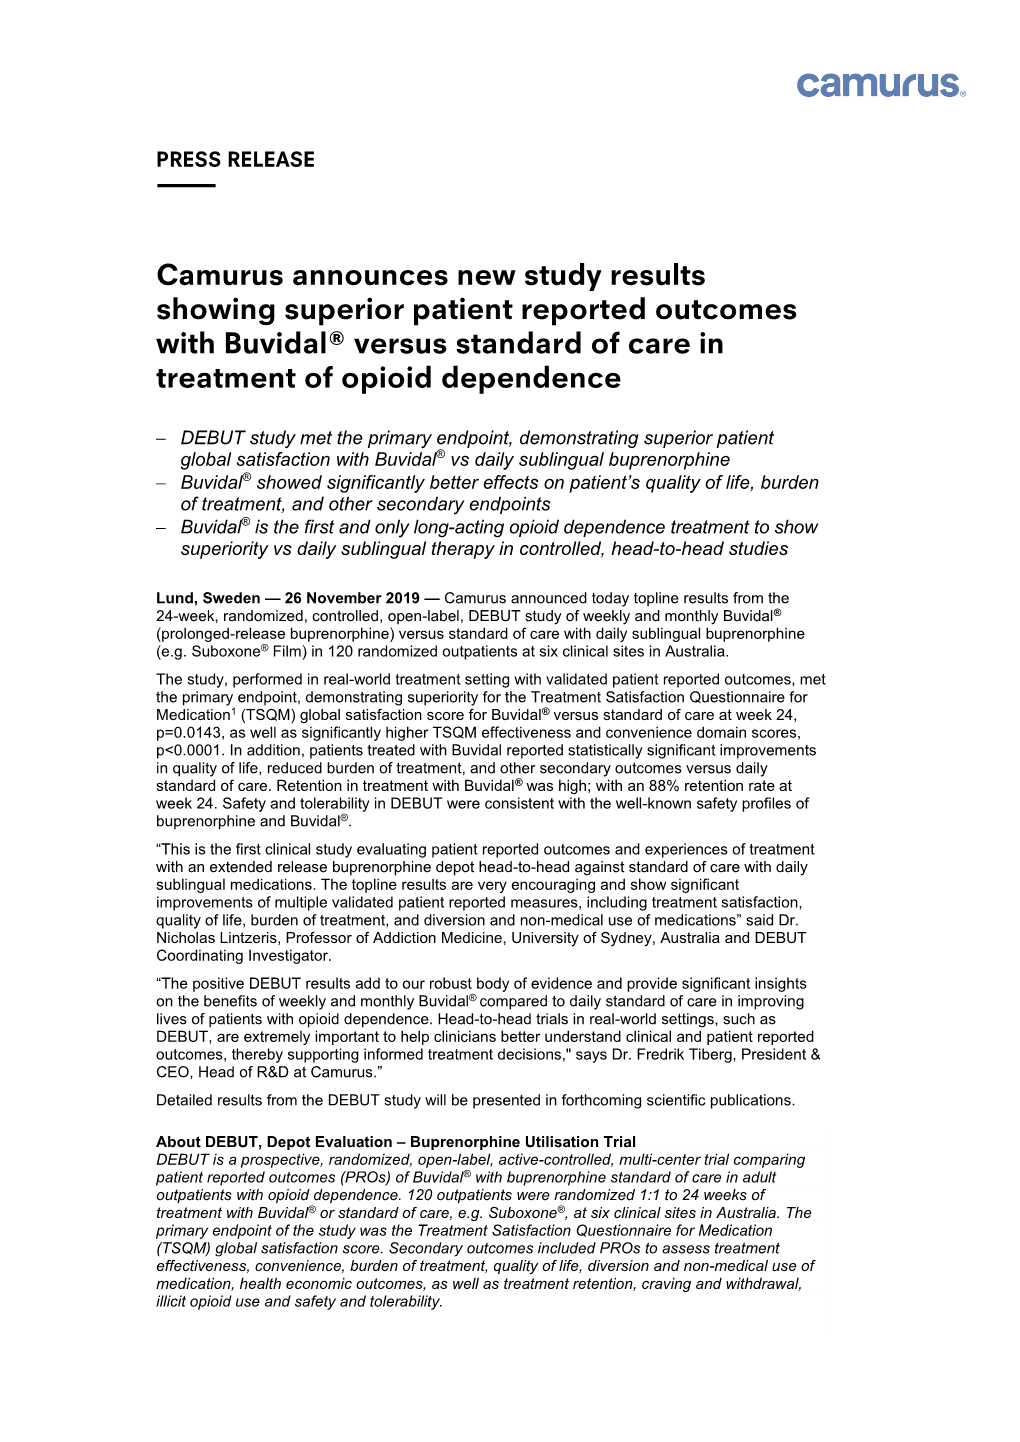 Camurus Announces New Study Results Showing Superior Patient Reported Outcomes with Buvidal® Versus Standard of Care in Treatment of Opioid Dependence